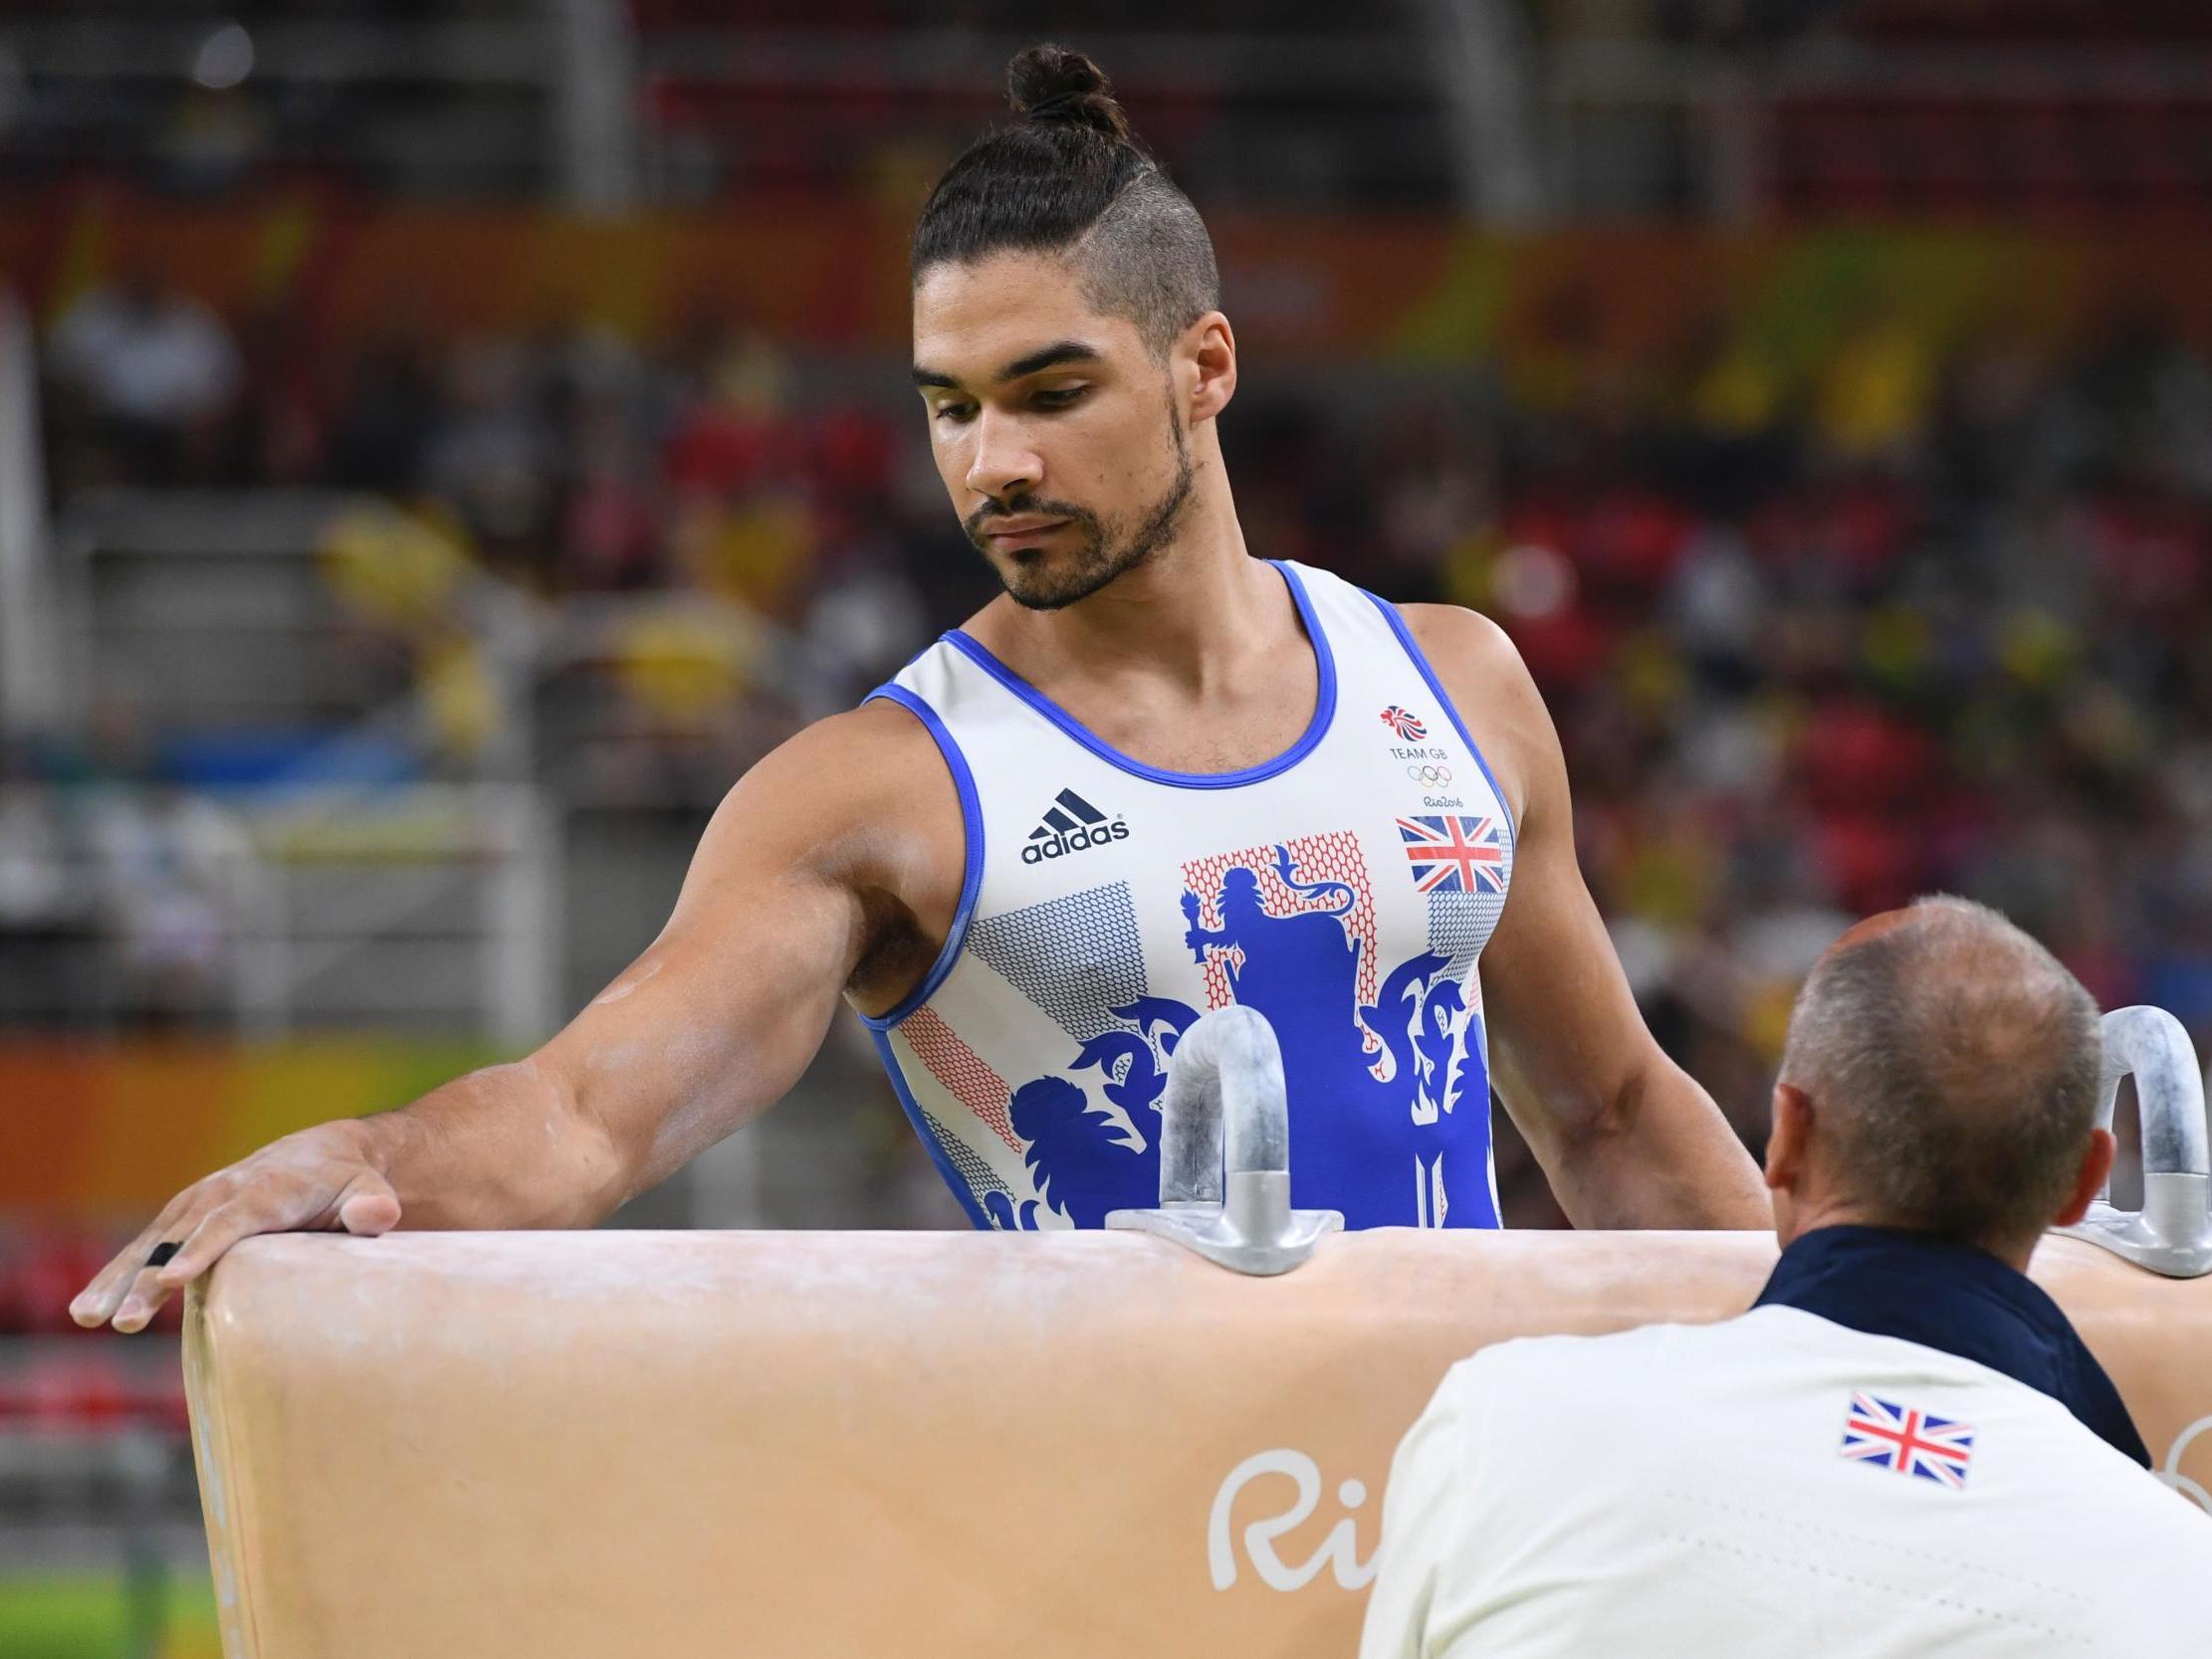 Olympian Louis Smith Announces Retirement From Gymnastics The Independent